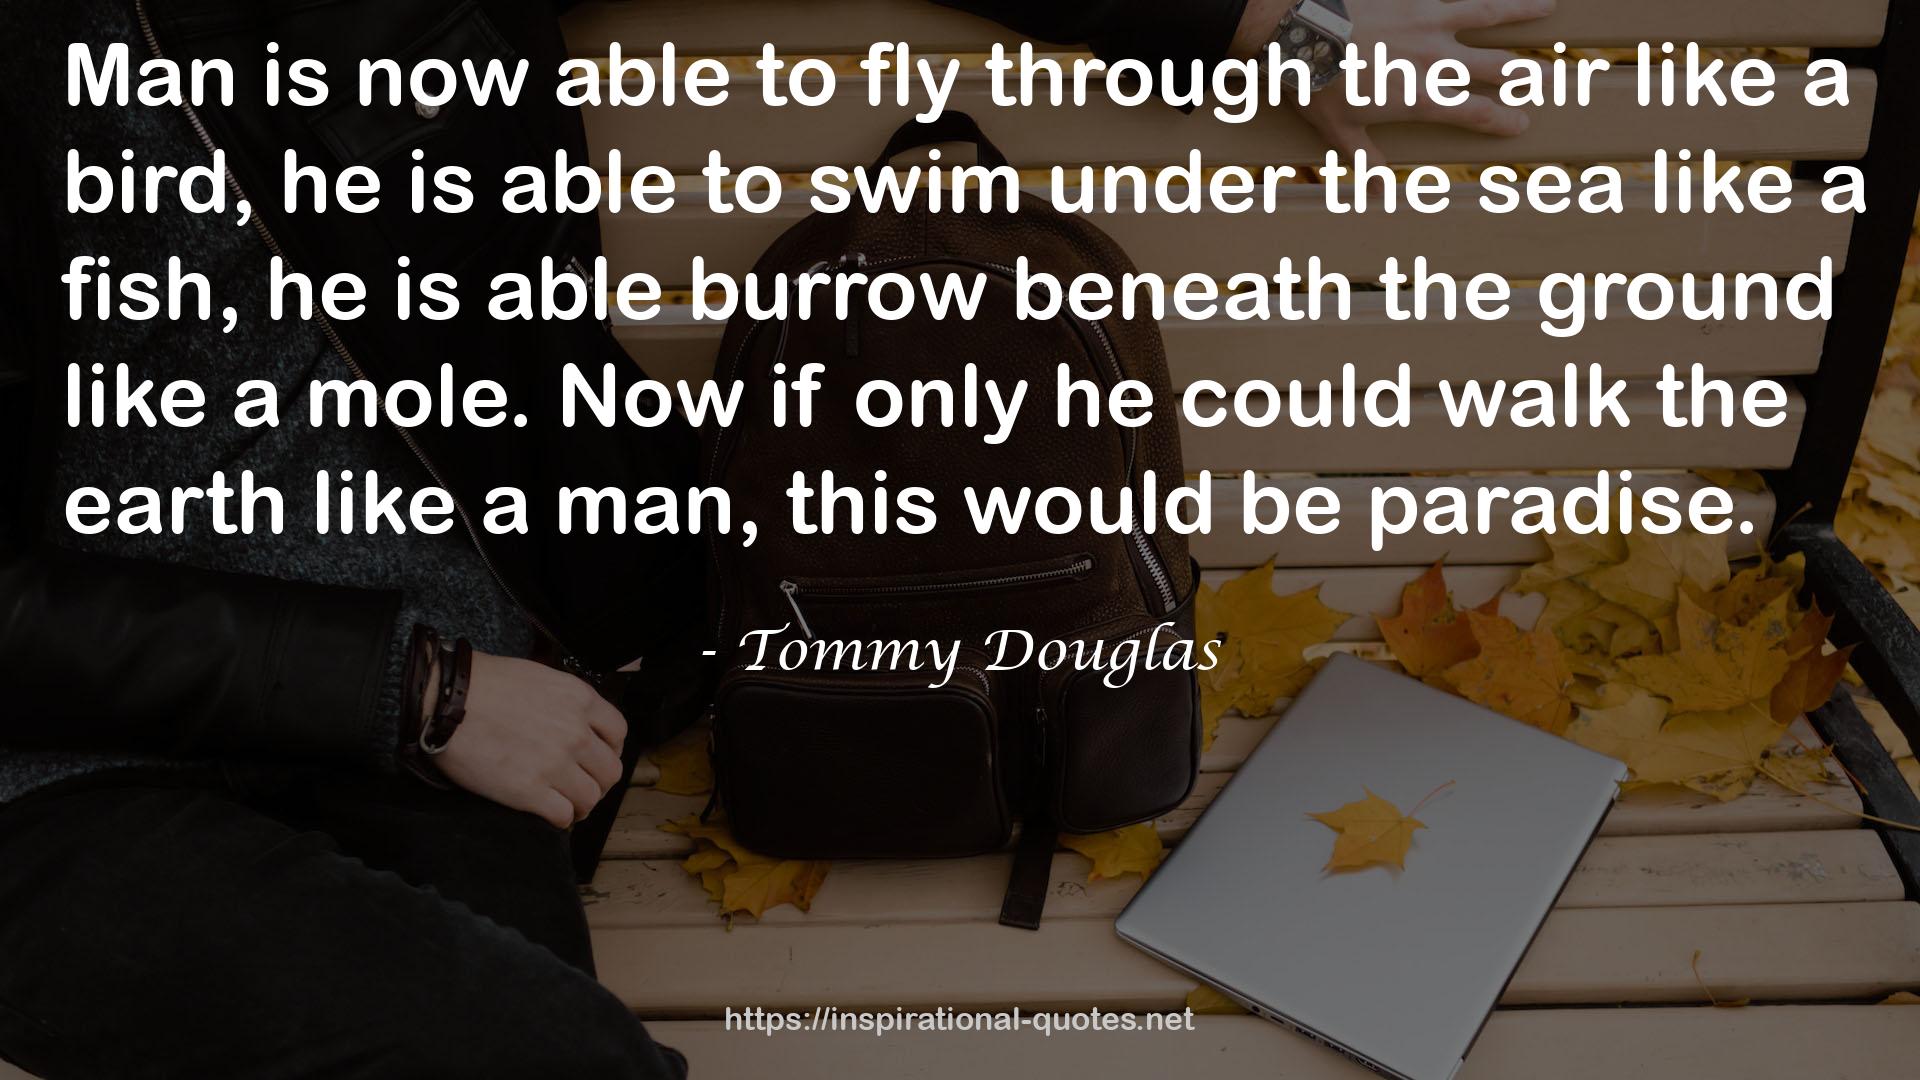 Tommy Douglas QUOTES